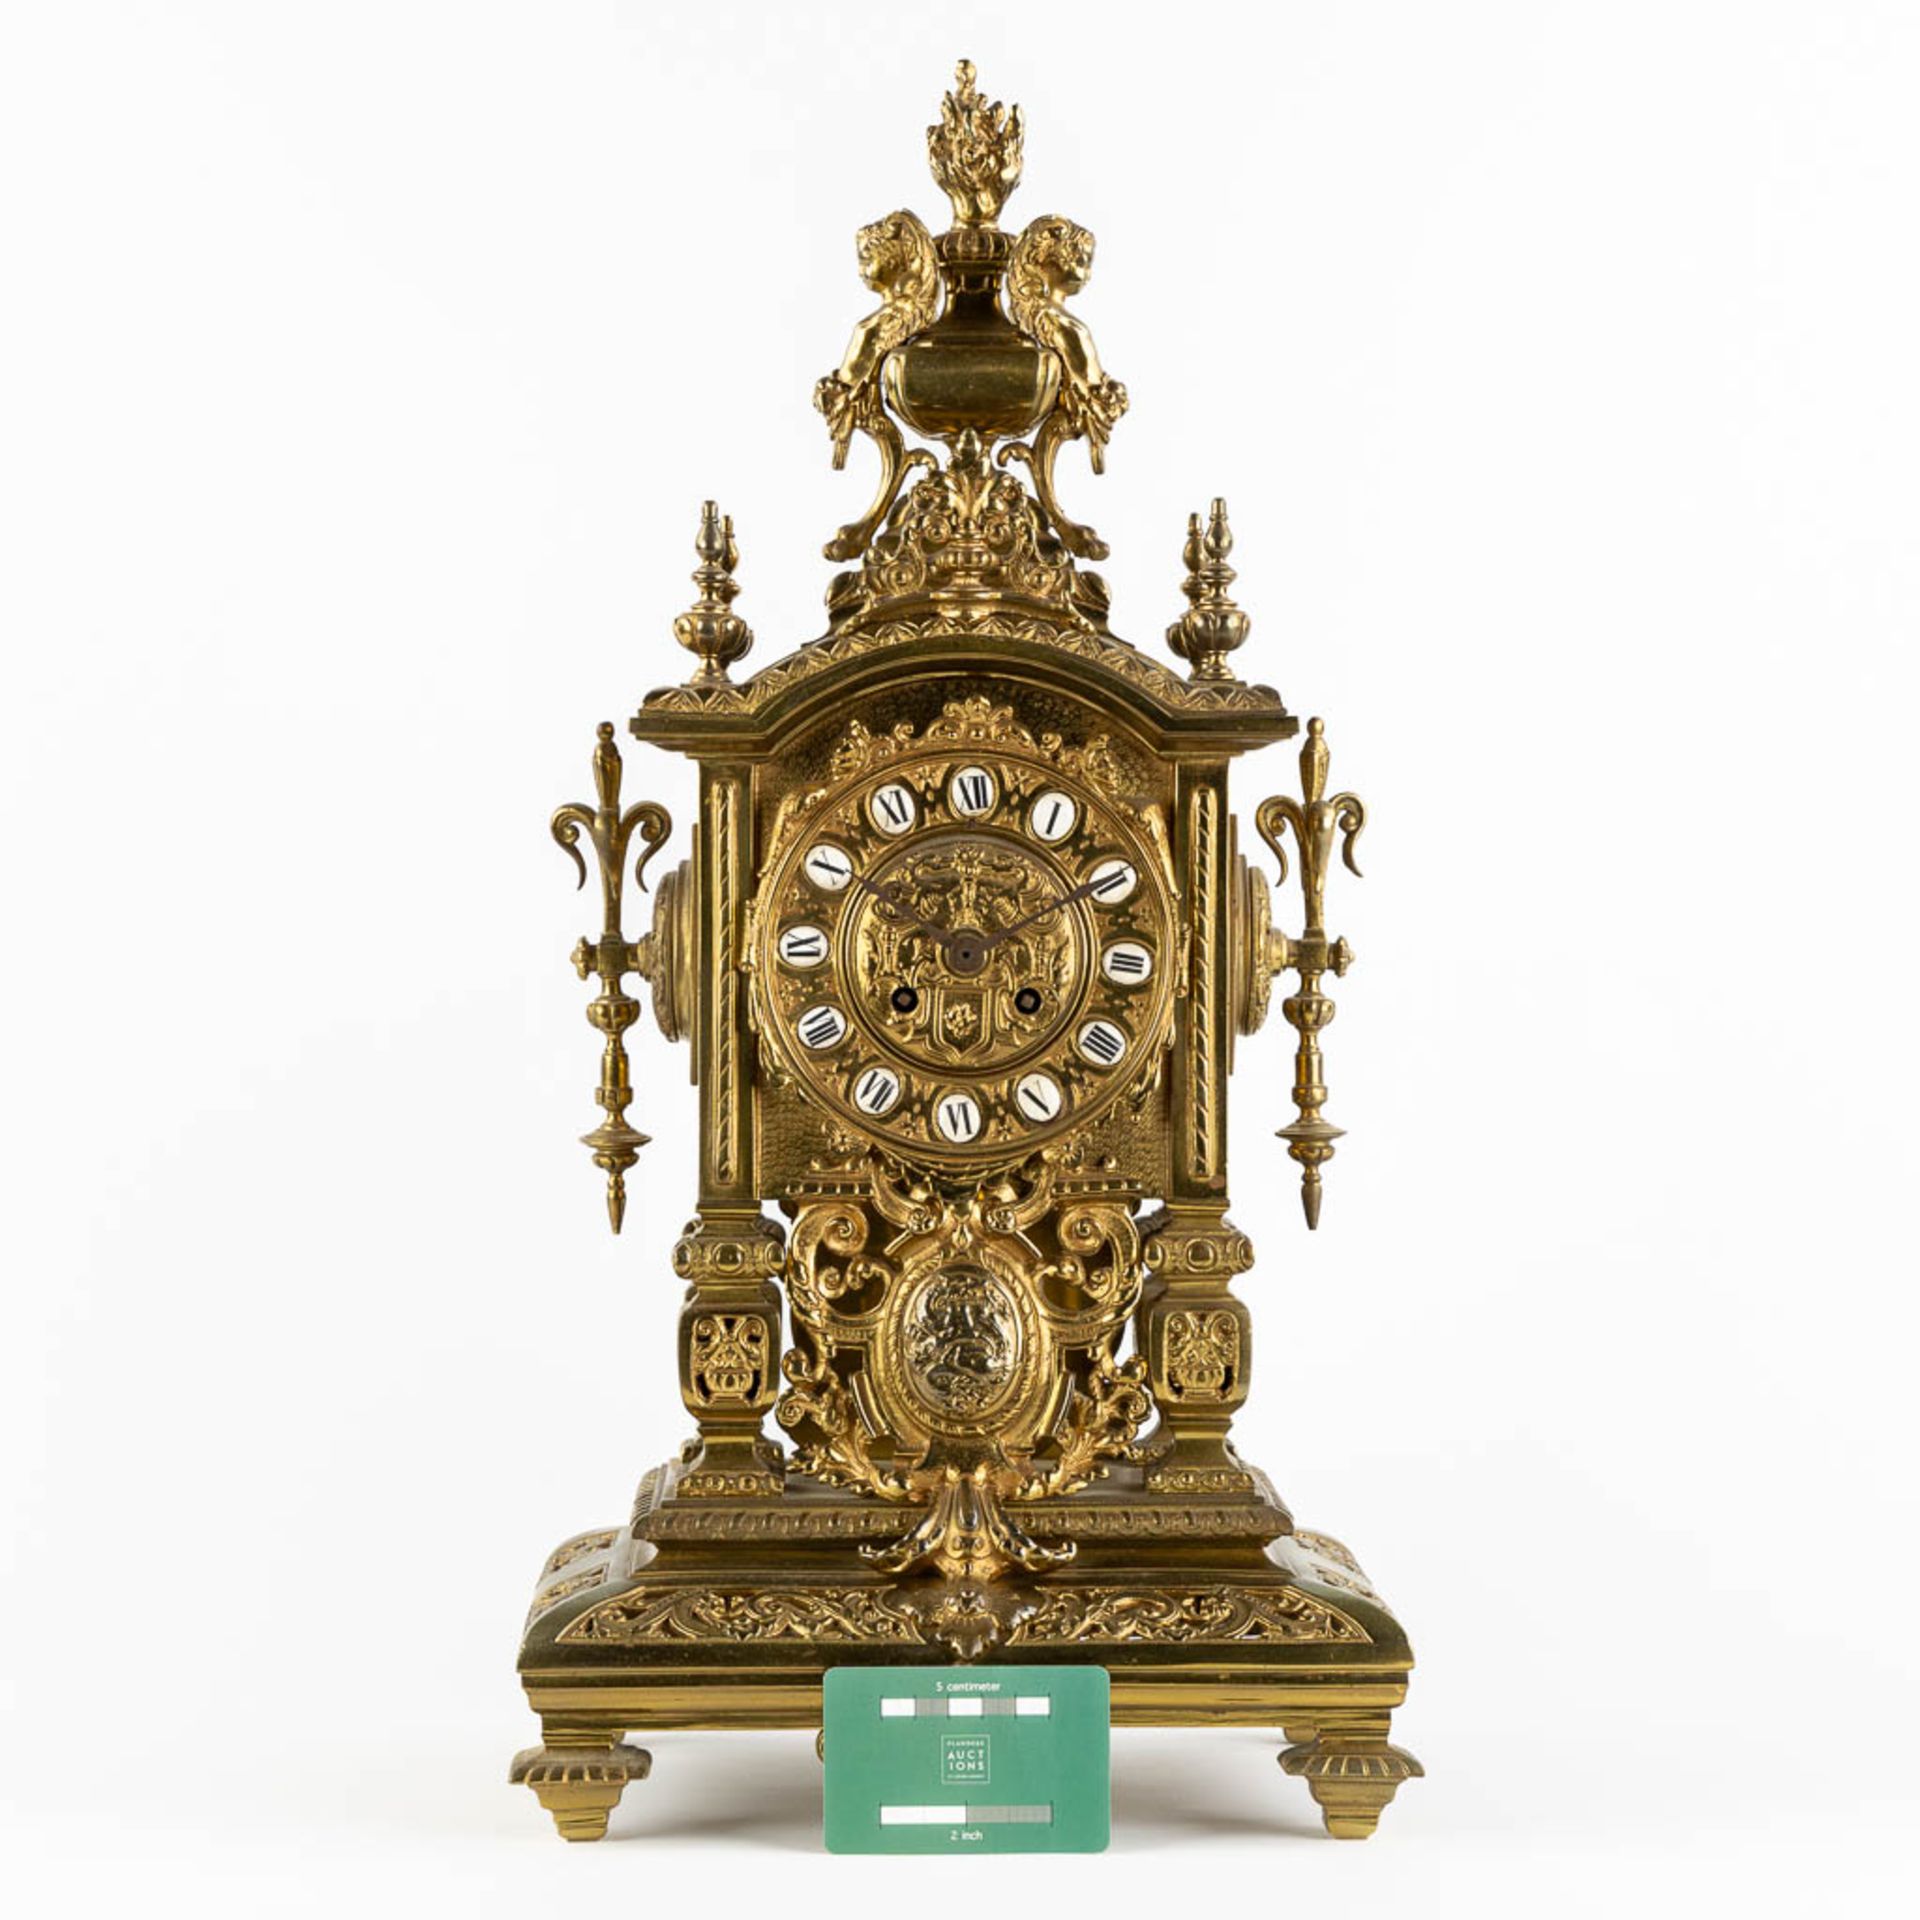 A mantle clock, bronze decorated with angels. Circa 1900. (L:21 x W:27 x H:54 cm) - Image 2 of 13